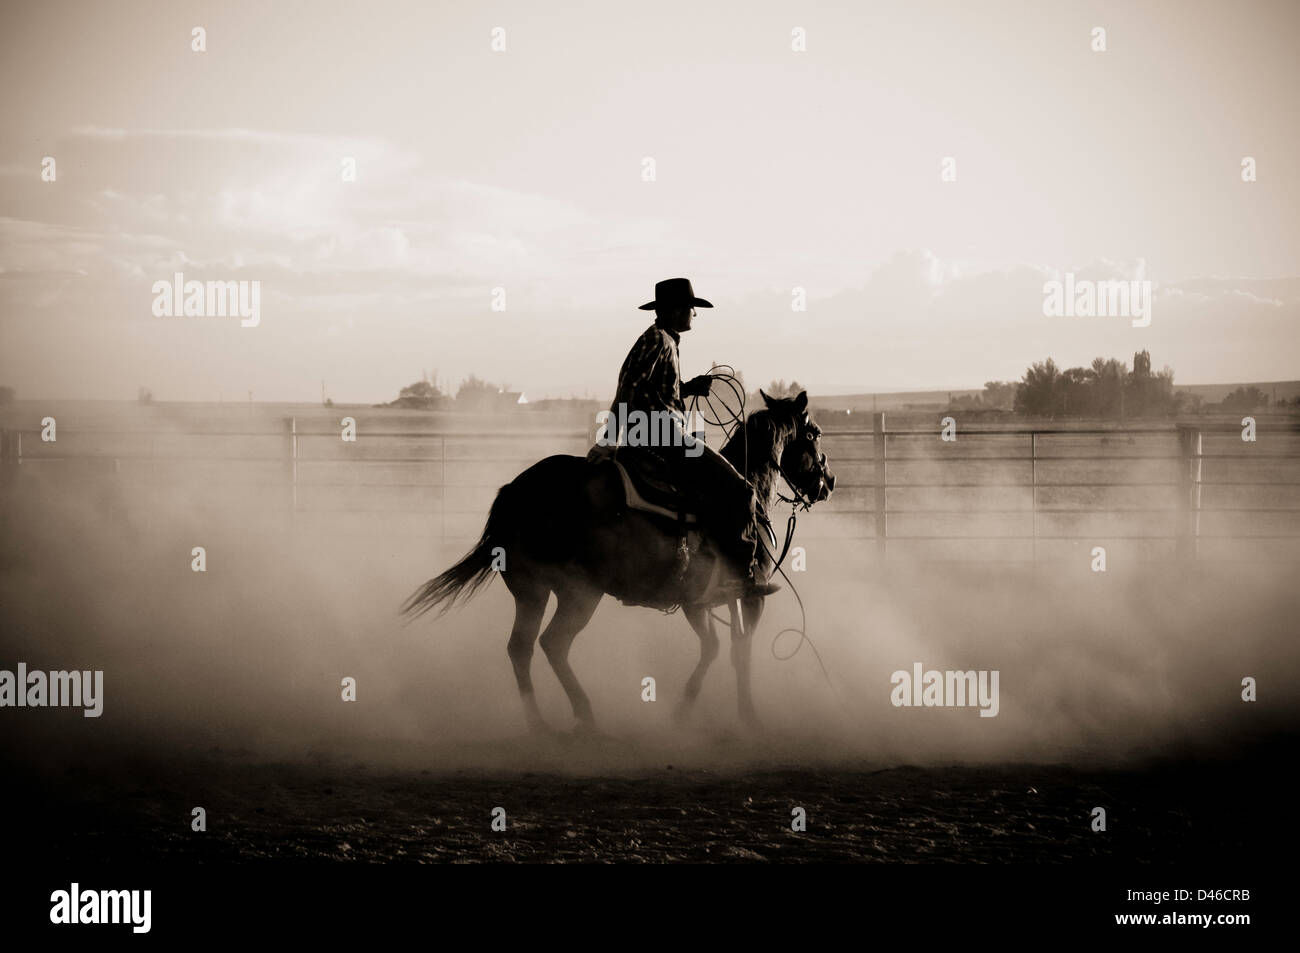 Cowboy riding horse in dusty arena. Black and White. Twin Falls, Idaho. Stock Photo